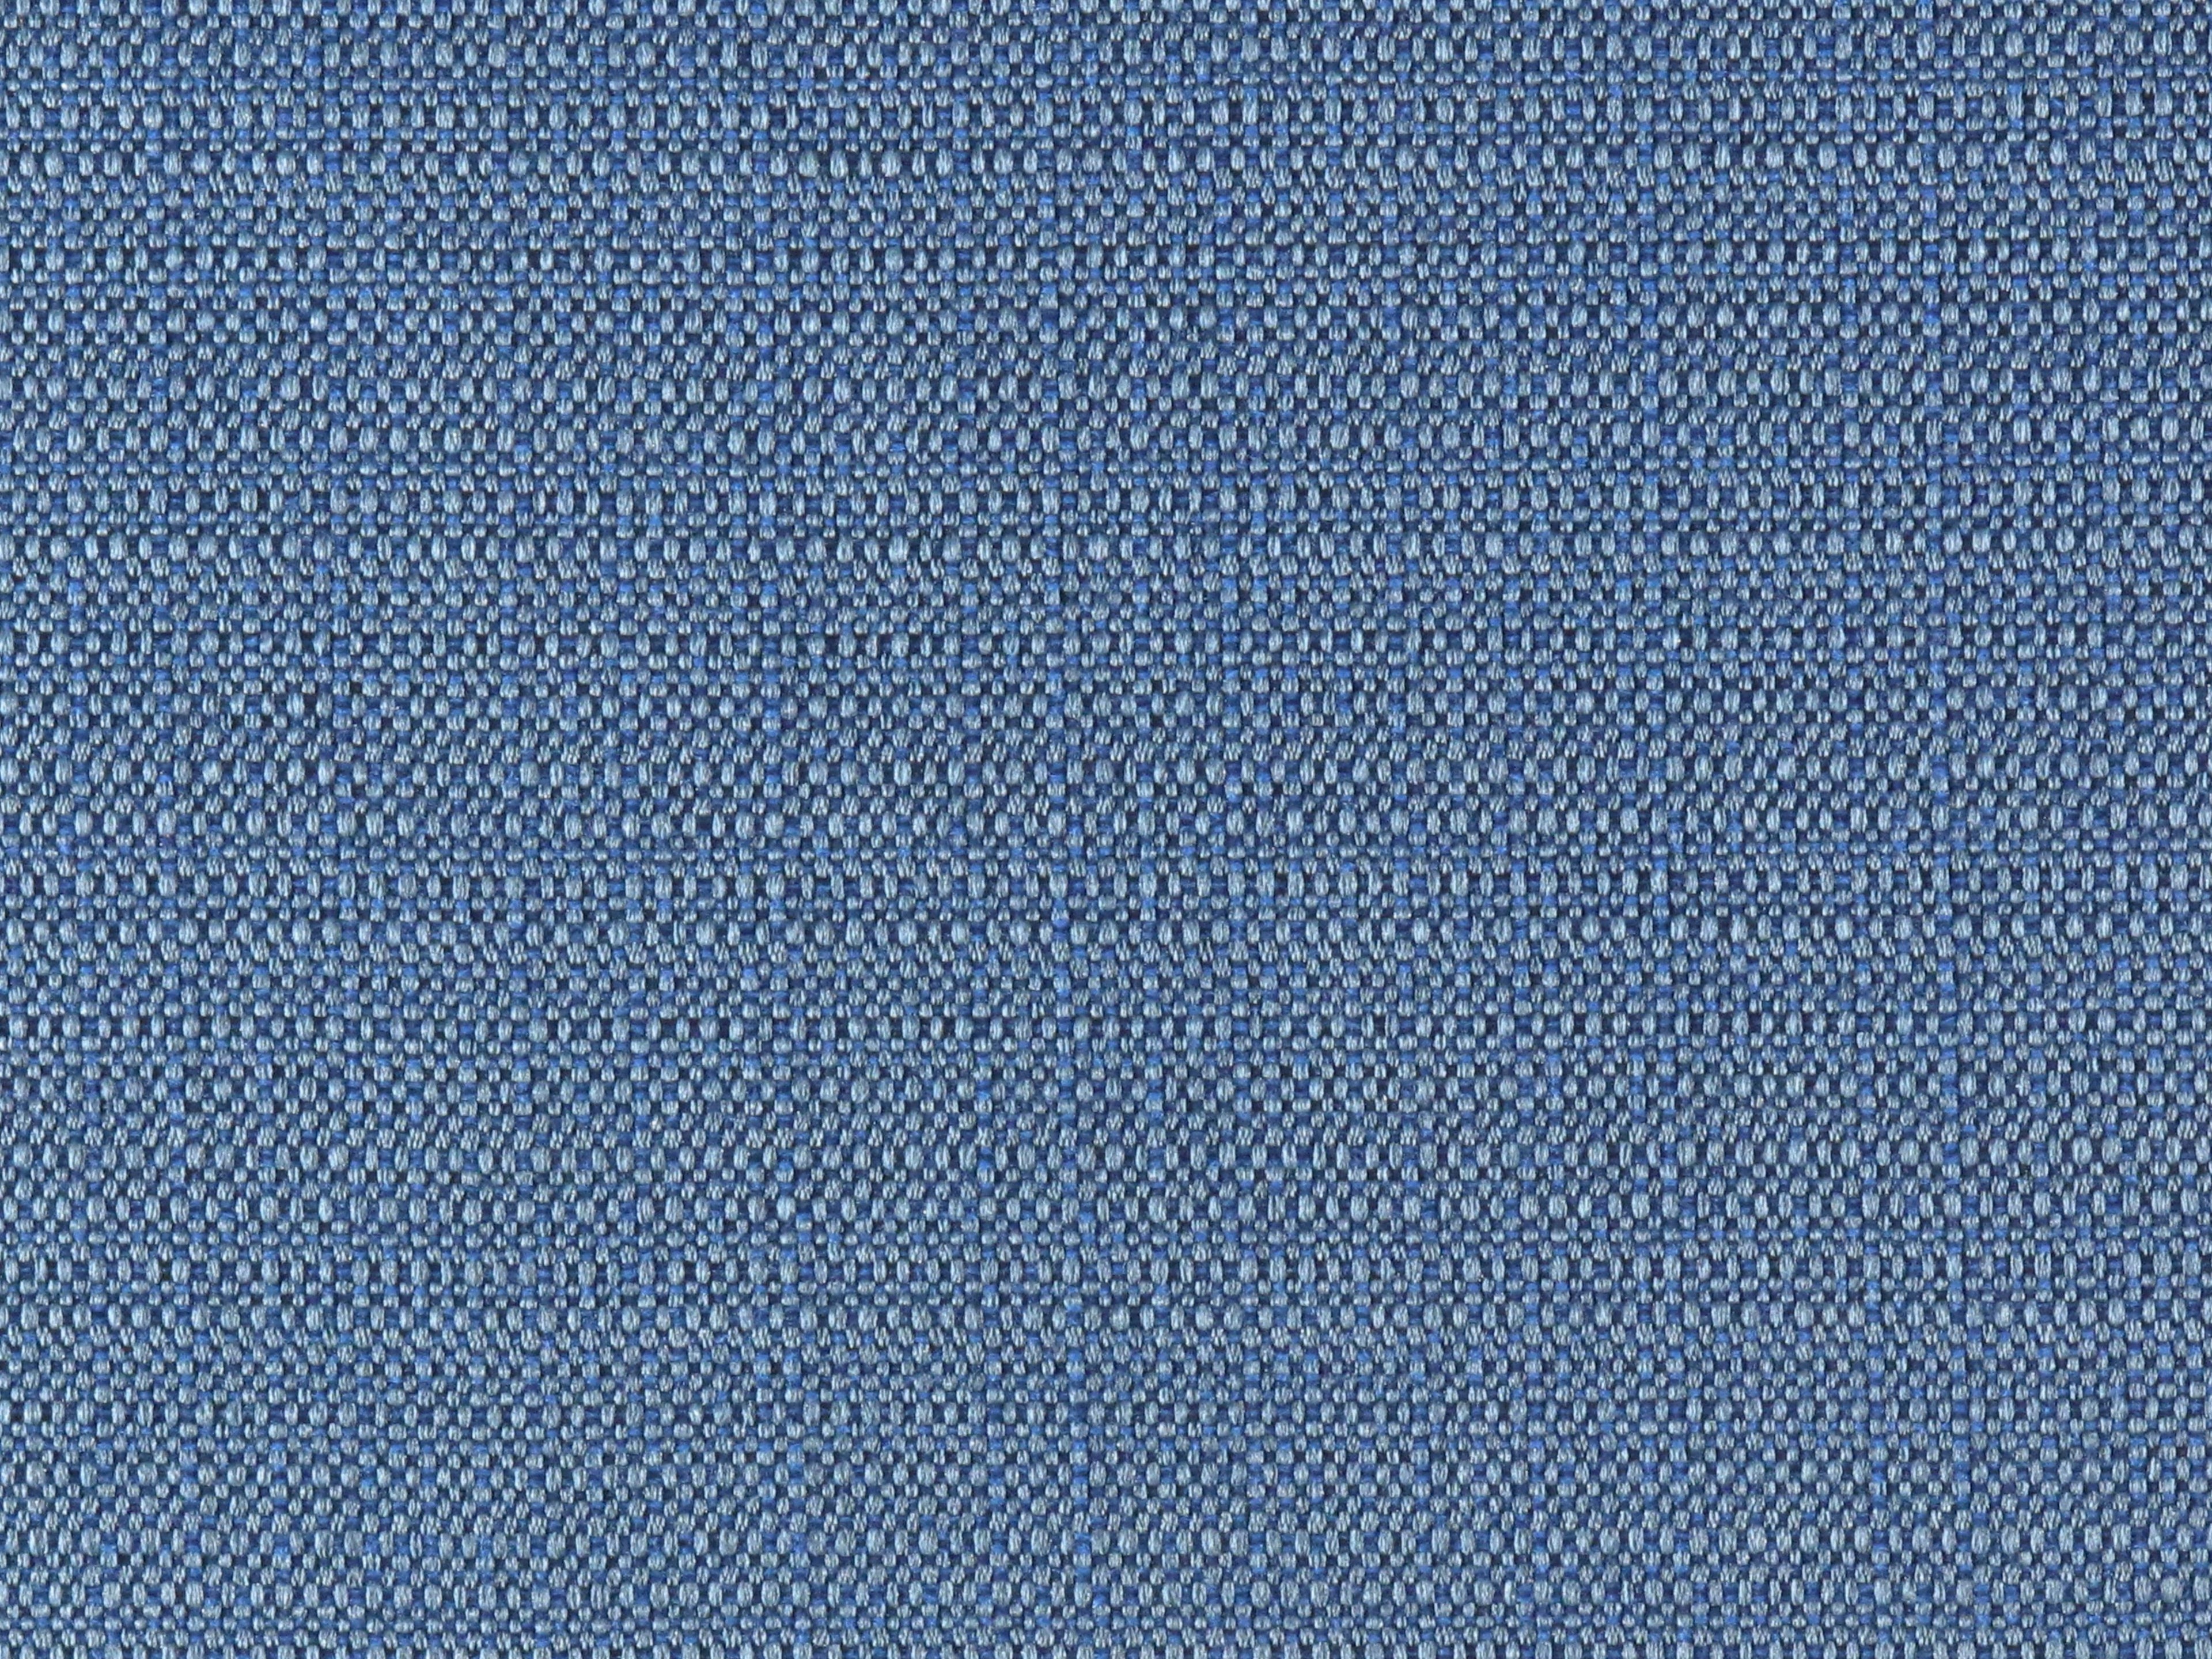 Crestmoor fabric in riviera color - pattern number WR 00013014 - by Scalamandre in the Old World Weavers collection